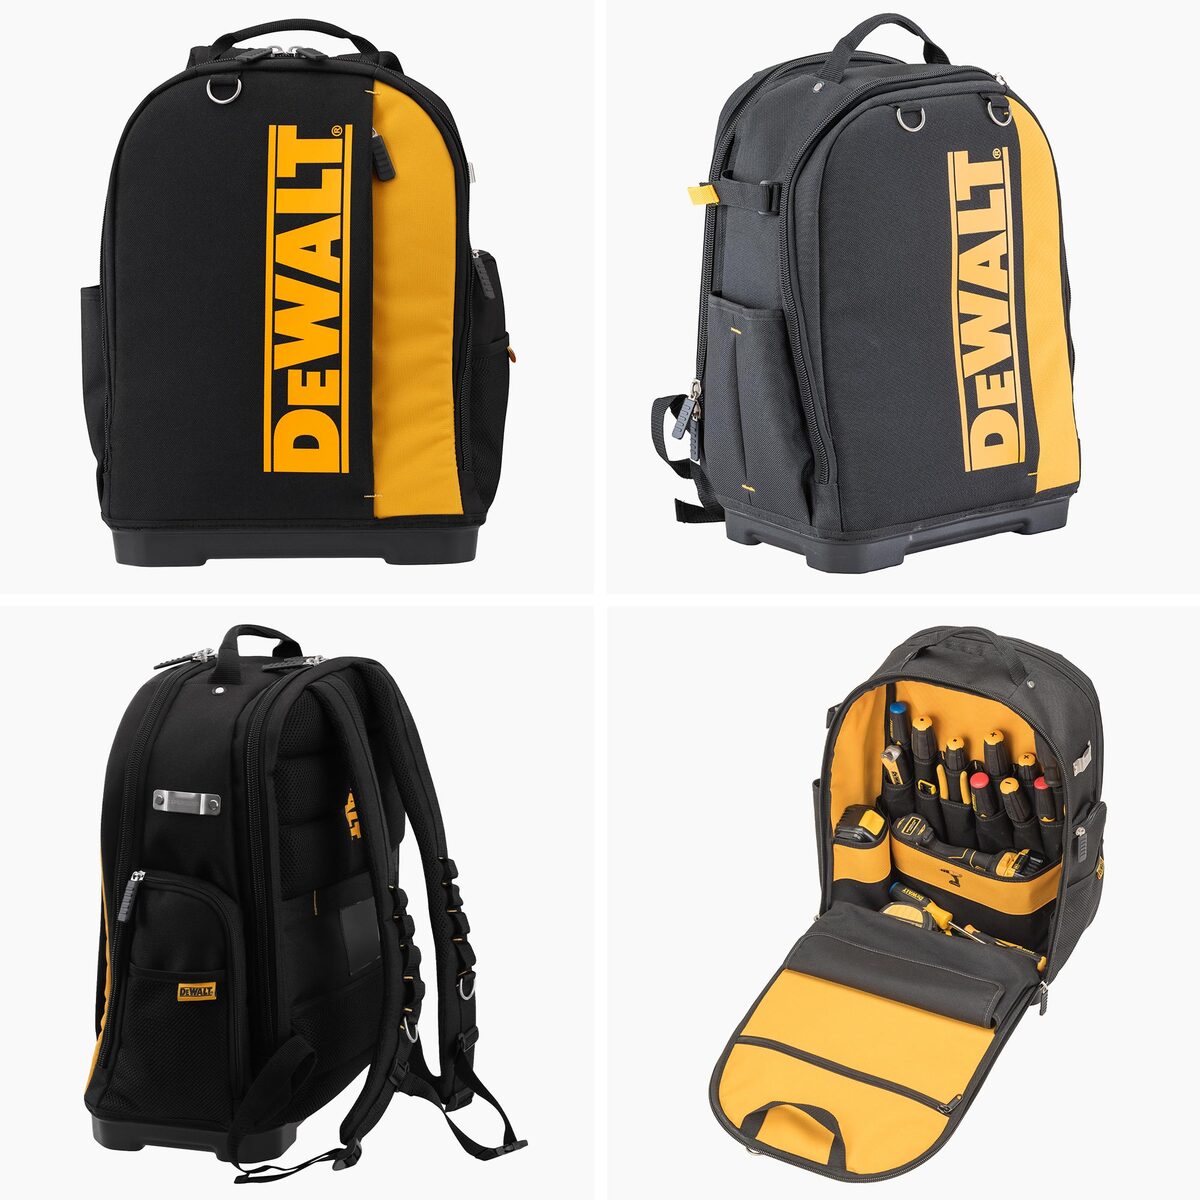 Cut out images of dewalt backpacks from different angles on white background